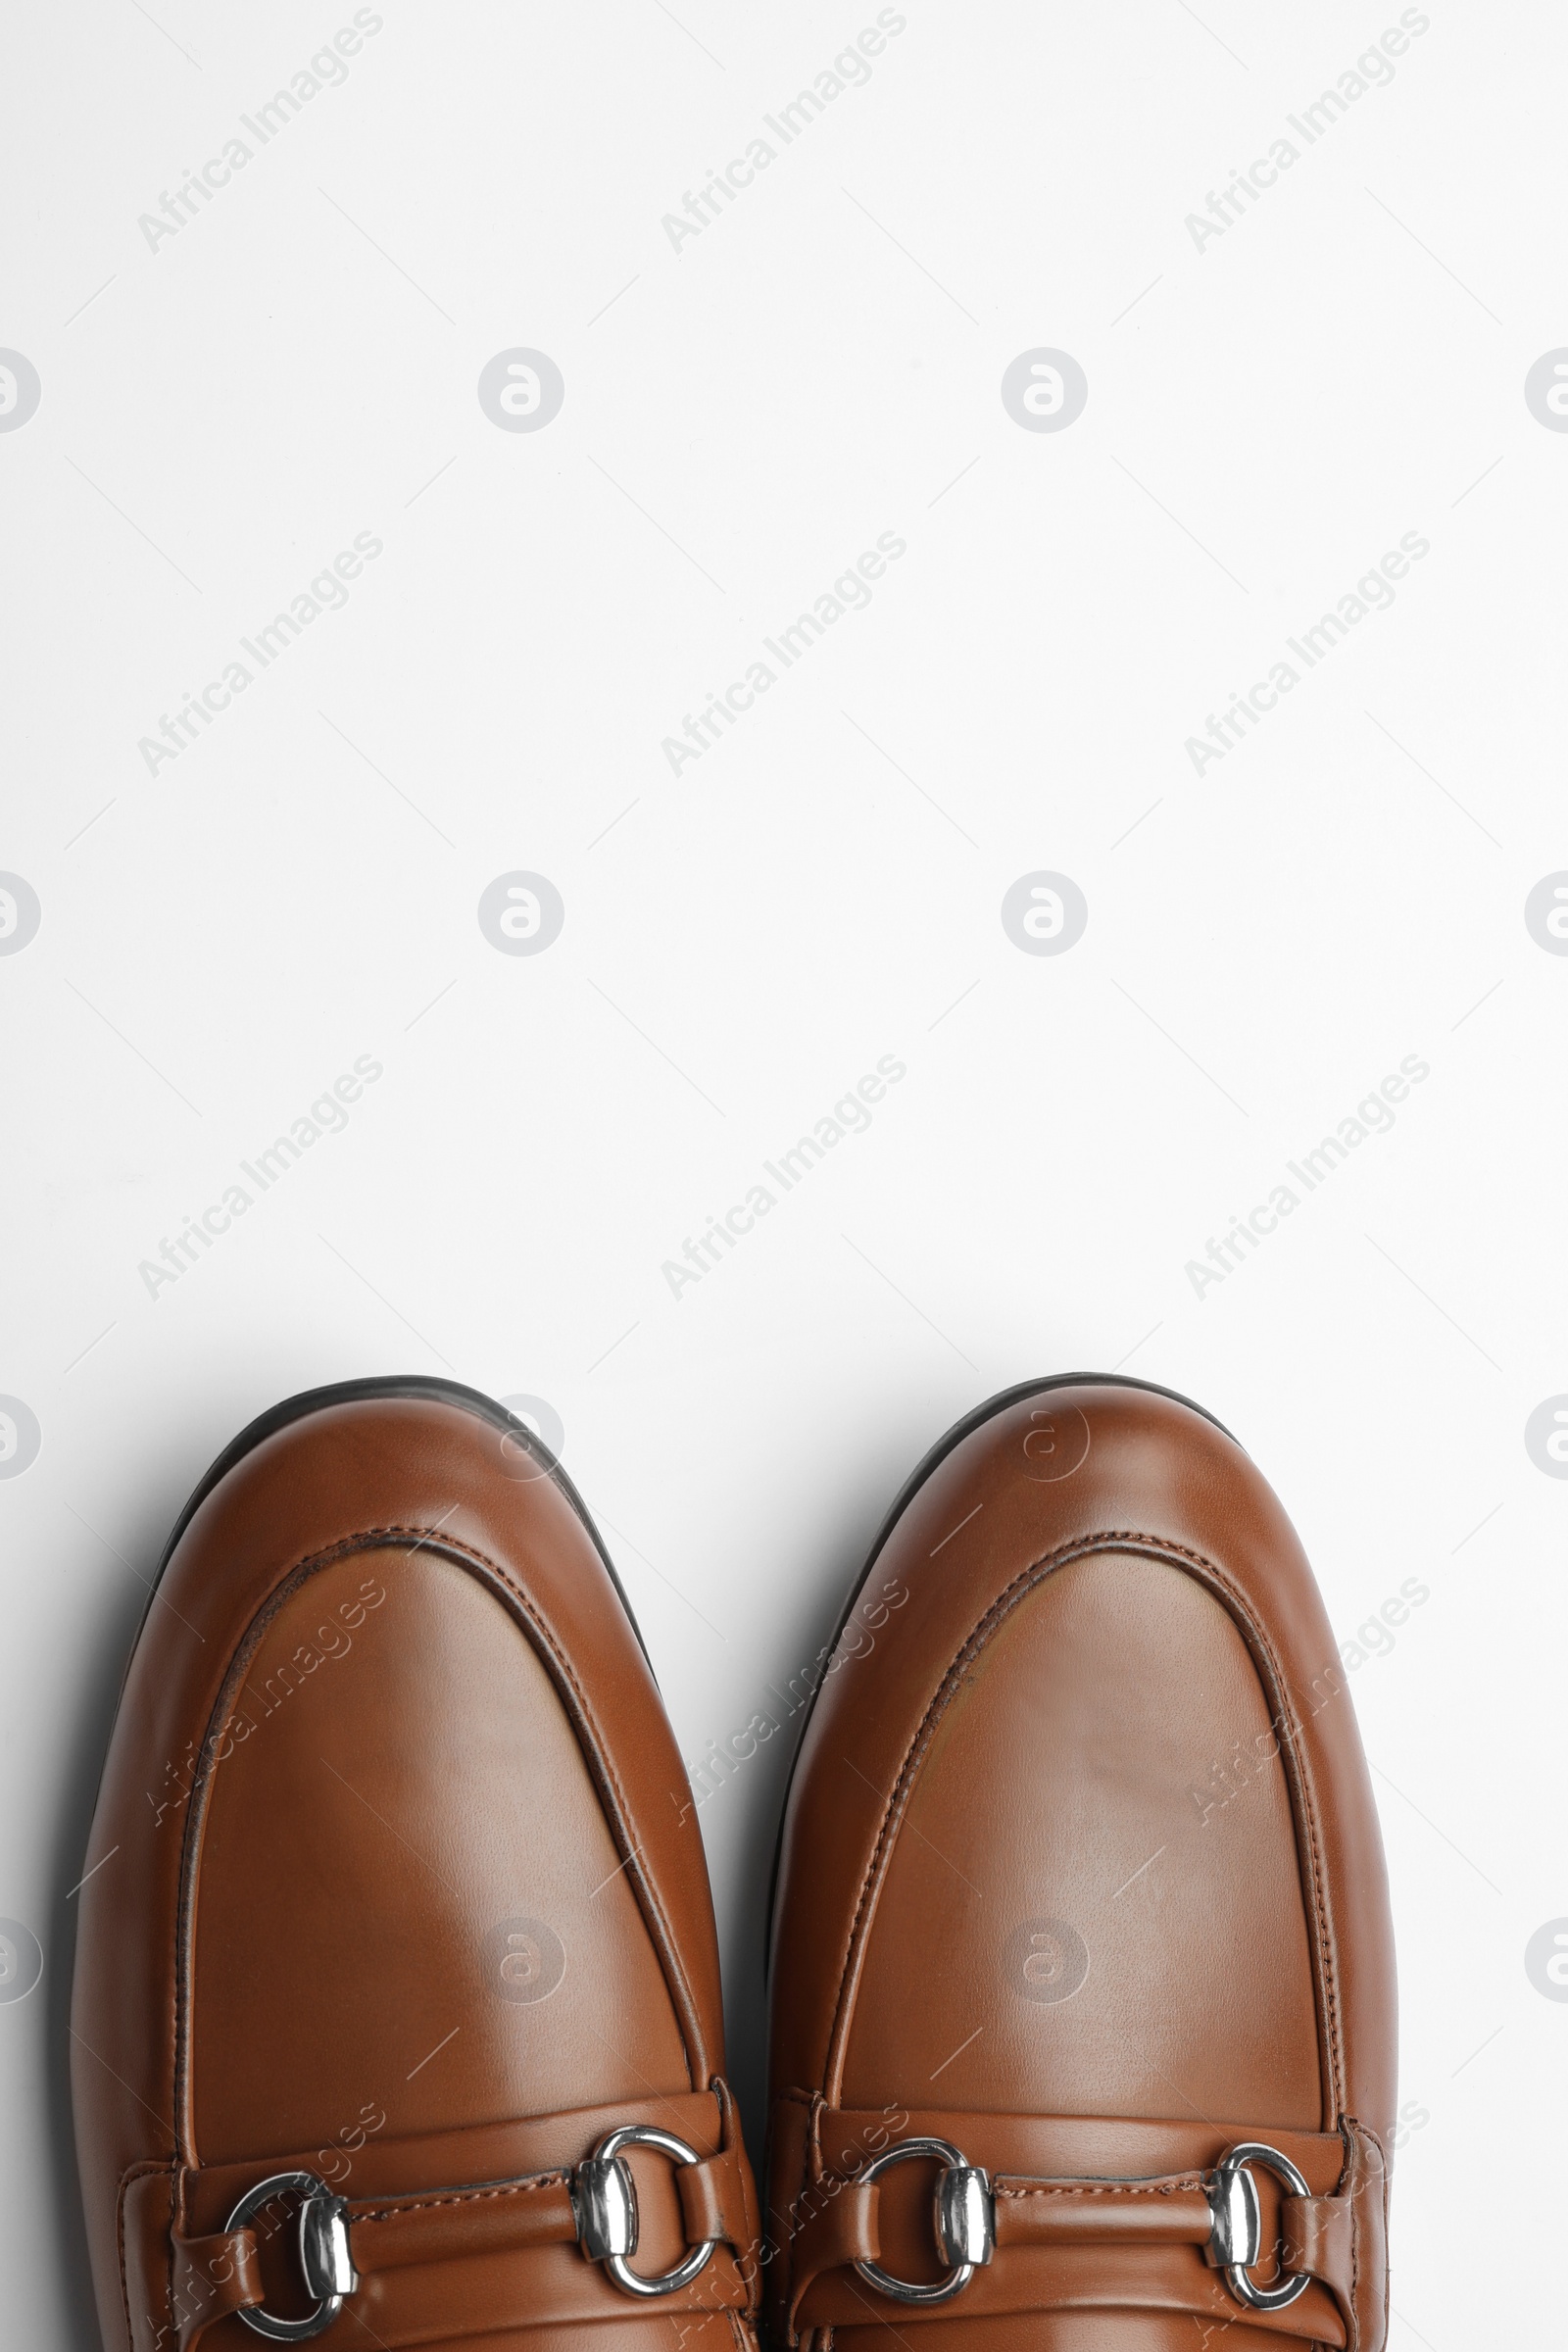 Photo of Pair of stylish male shoes isolated on white, top view